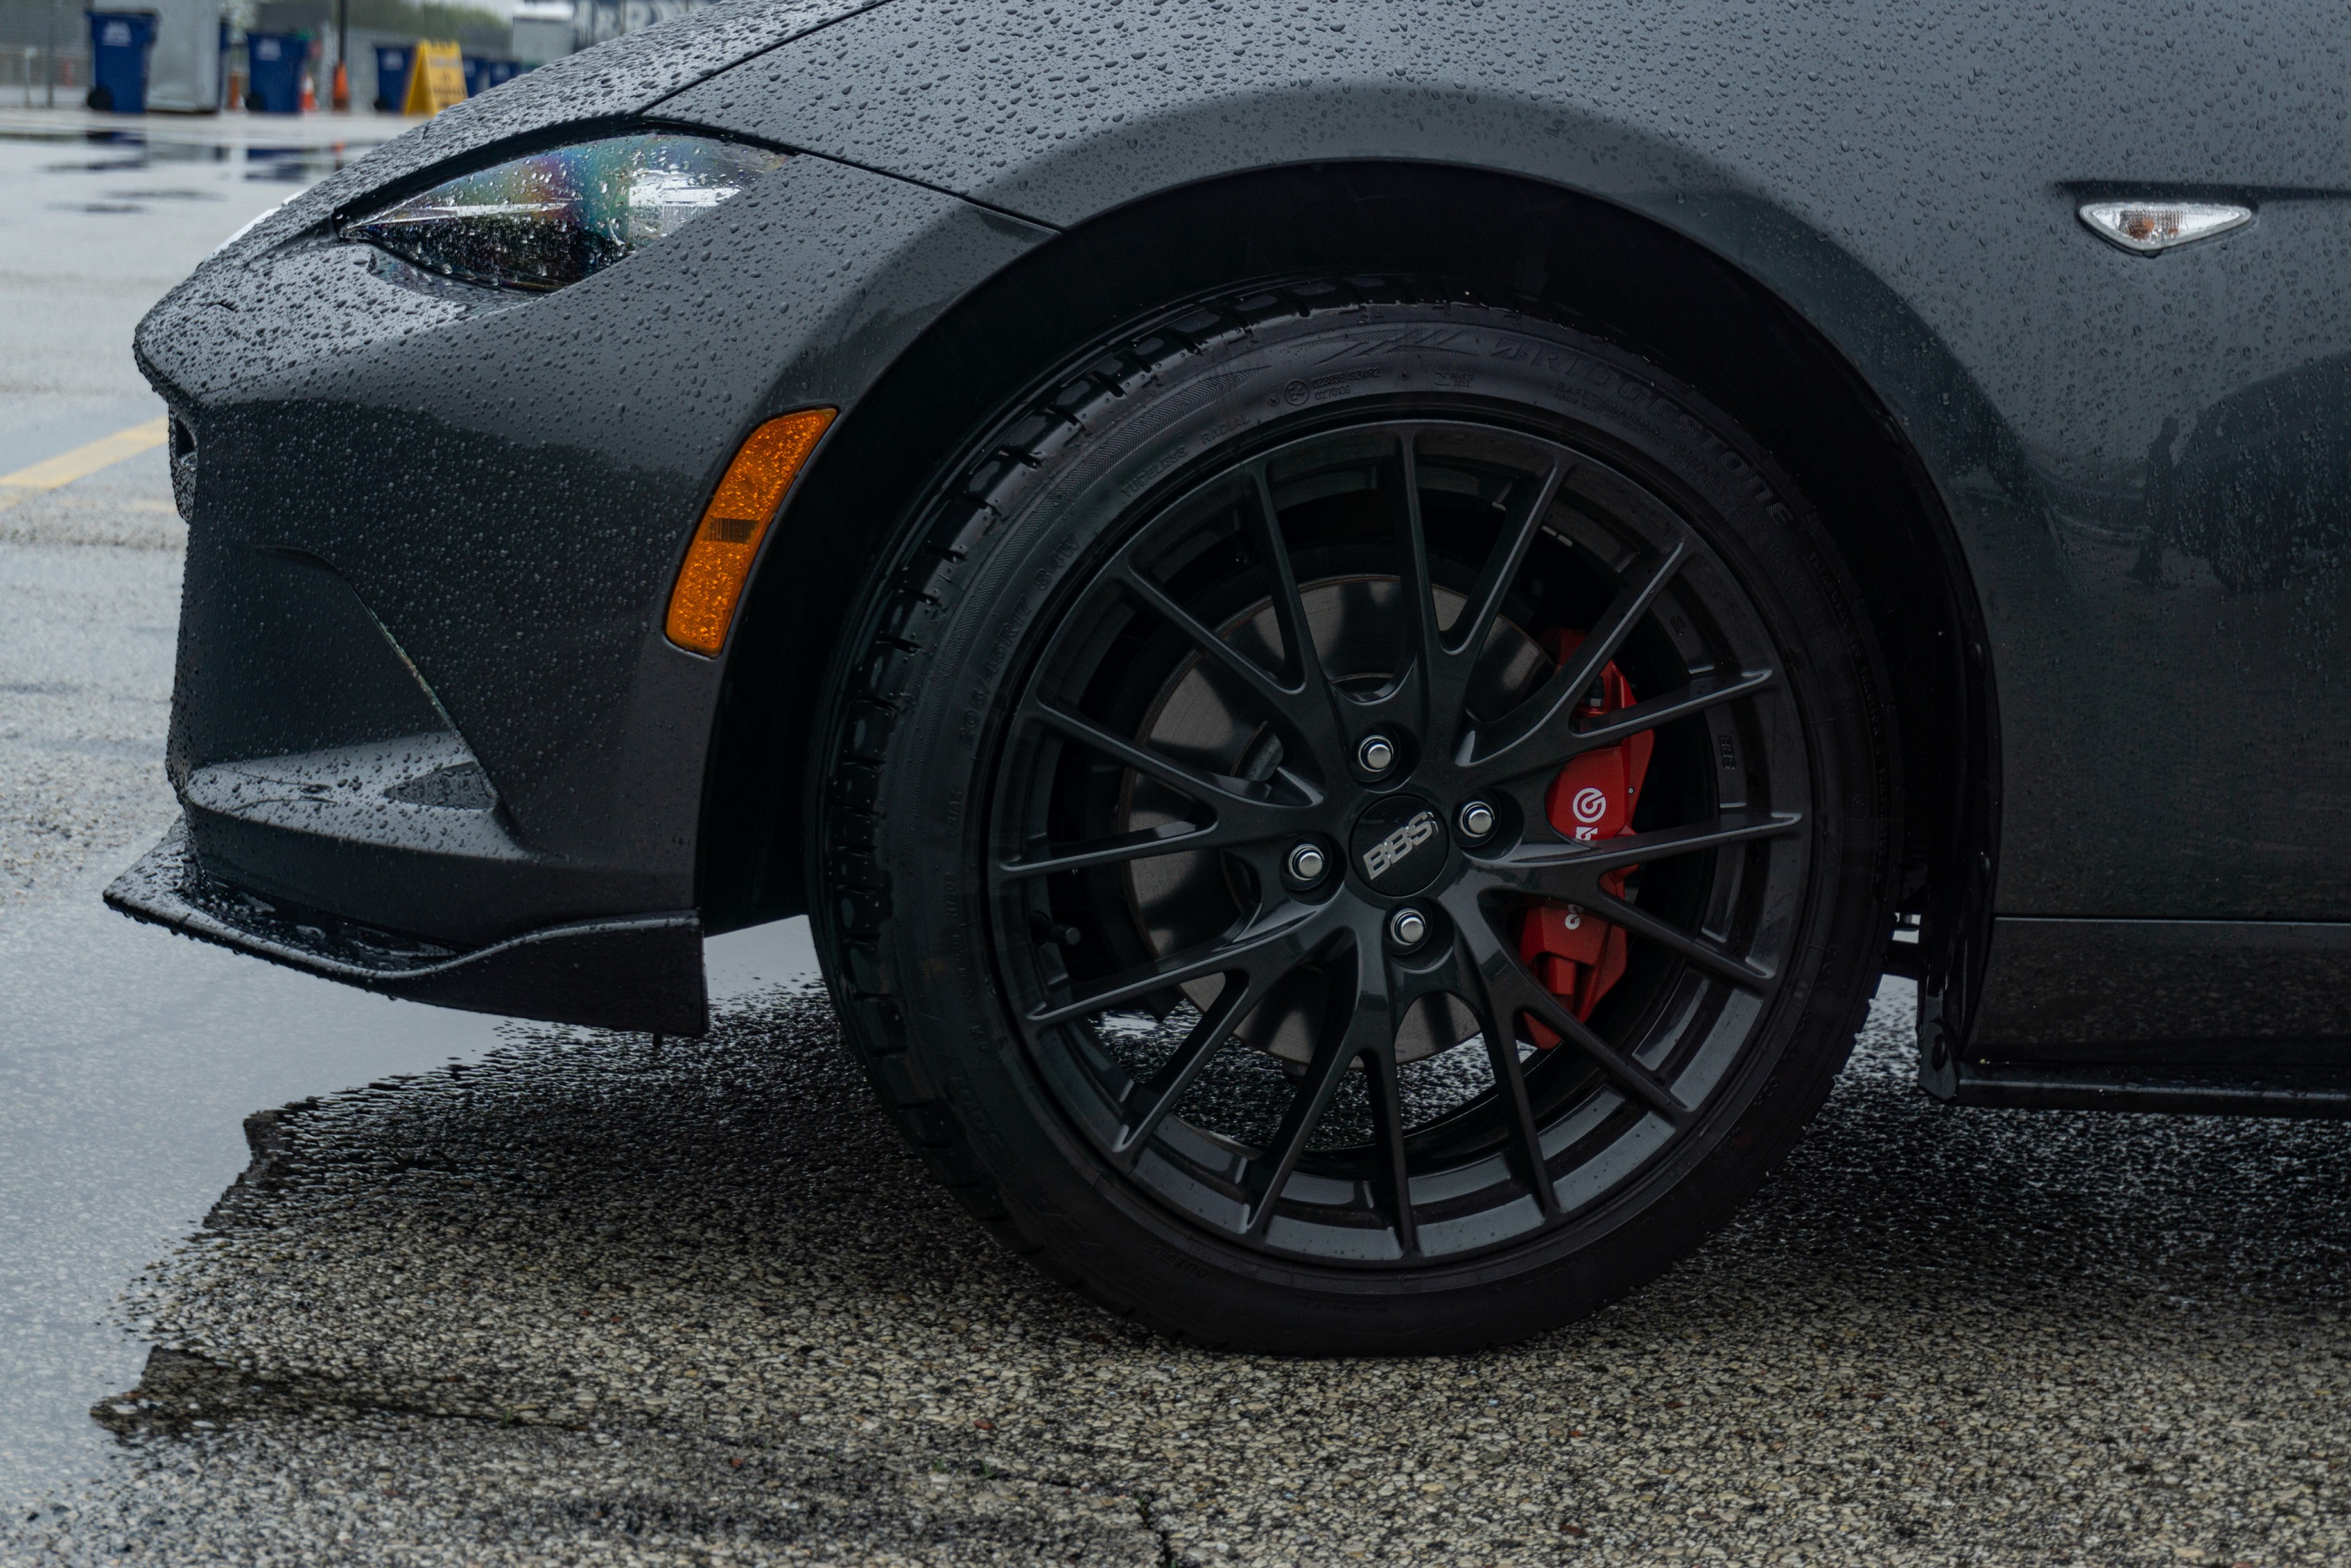 The front black BBS wheel and red Brembo brake caliper of a gray 2022 Mazda MX-5 Miata RF Club in a racetrack parking lot